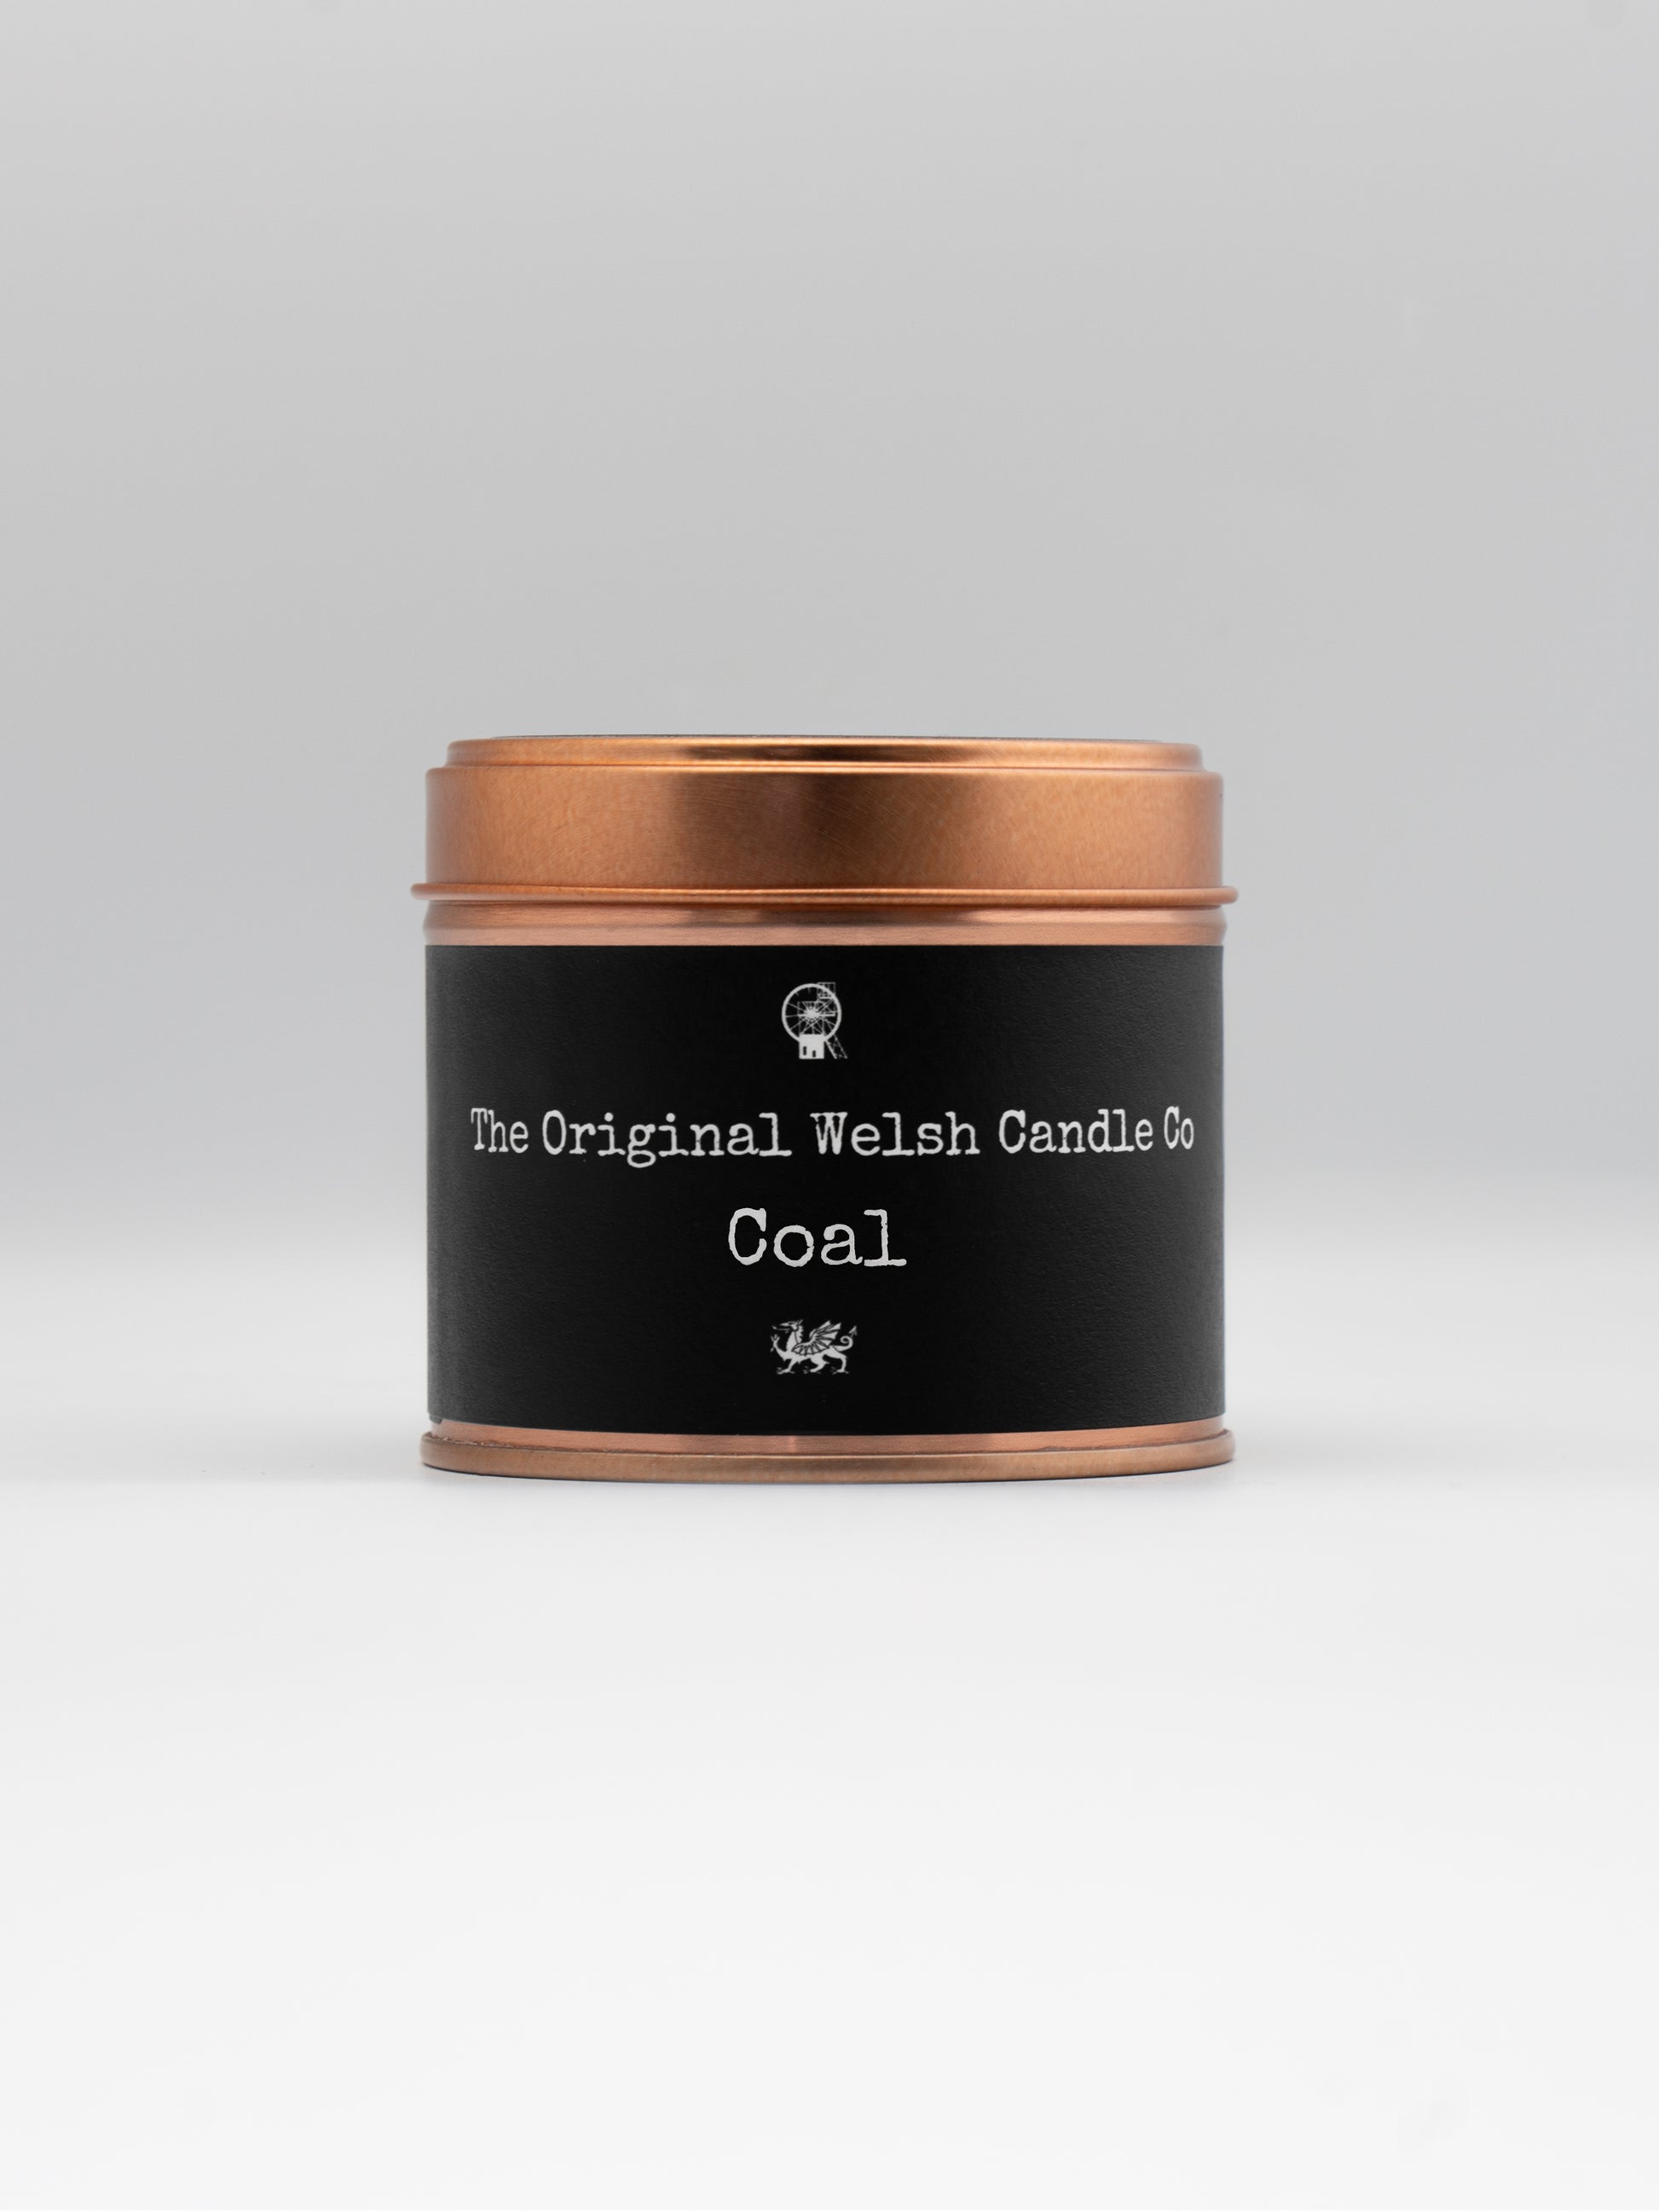 A copper tin containing a coal scented candle, chucnk of black wax sit on the top to look like coal, with a black label saying COAL candle